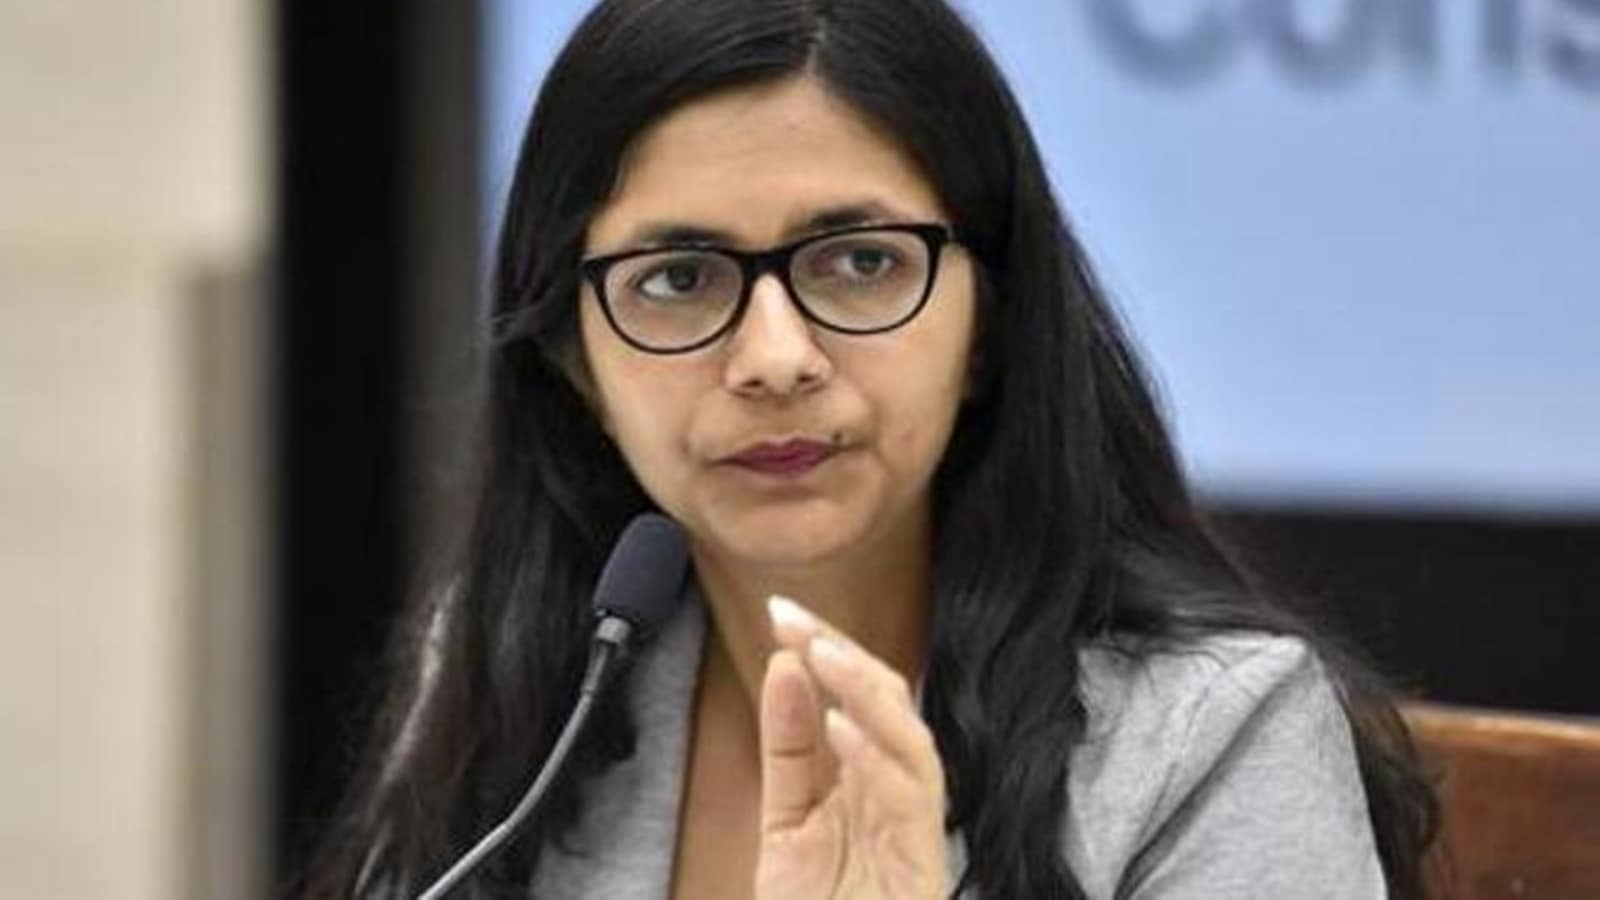 Swati Singh Sex Video - DCW chief writes to Twitter, Delhi Police on child porn clips 'sold for  â‚¹20' | Latest News India - Hindustan Times